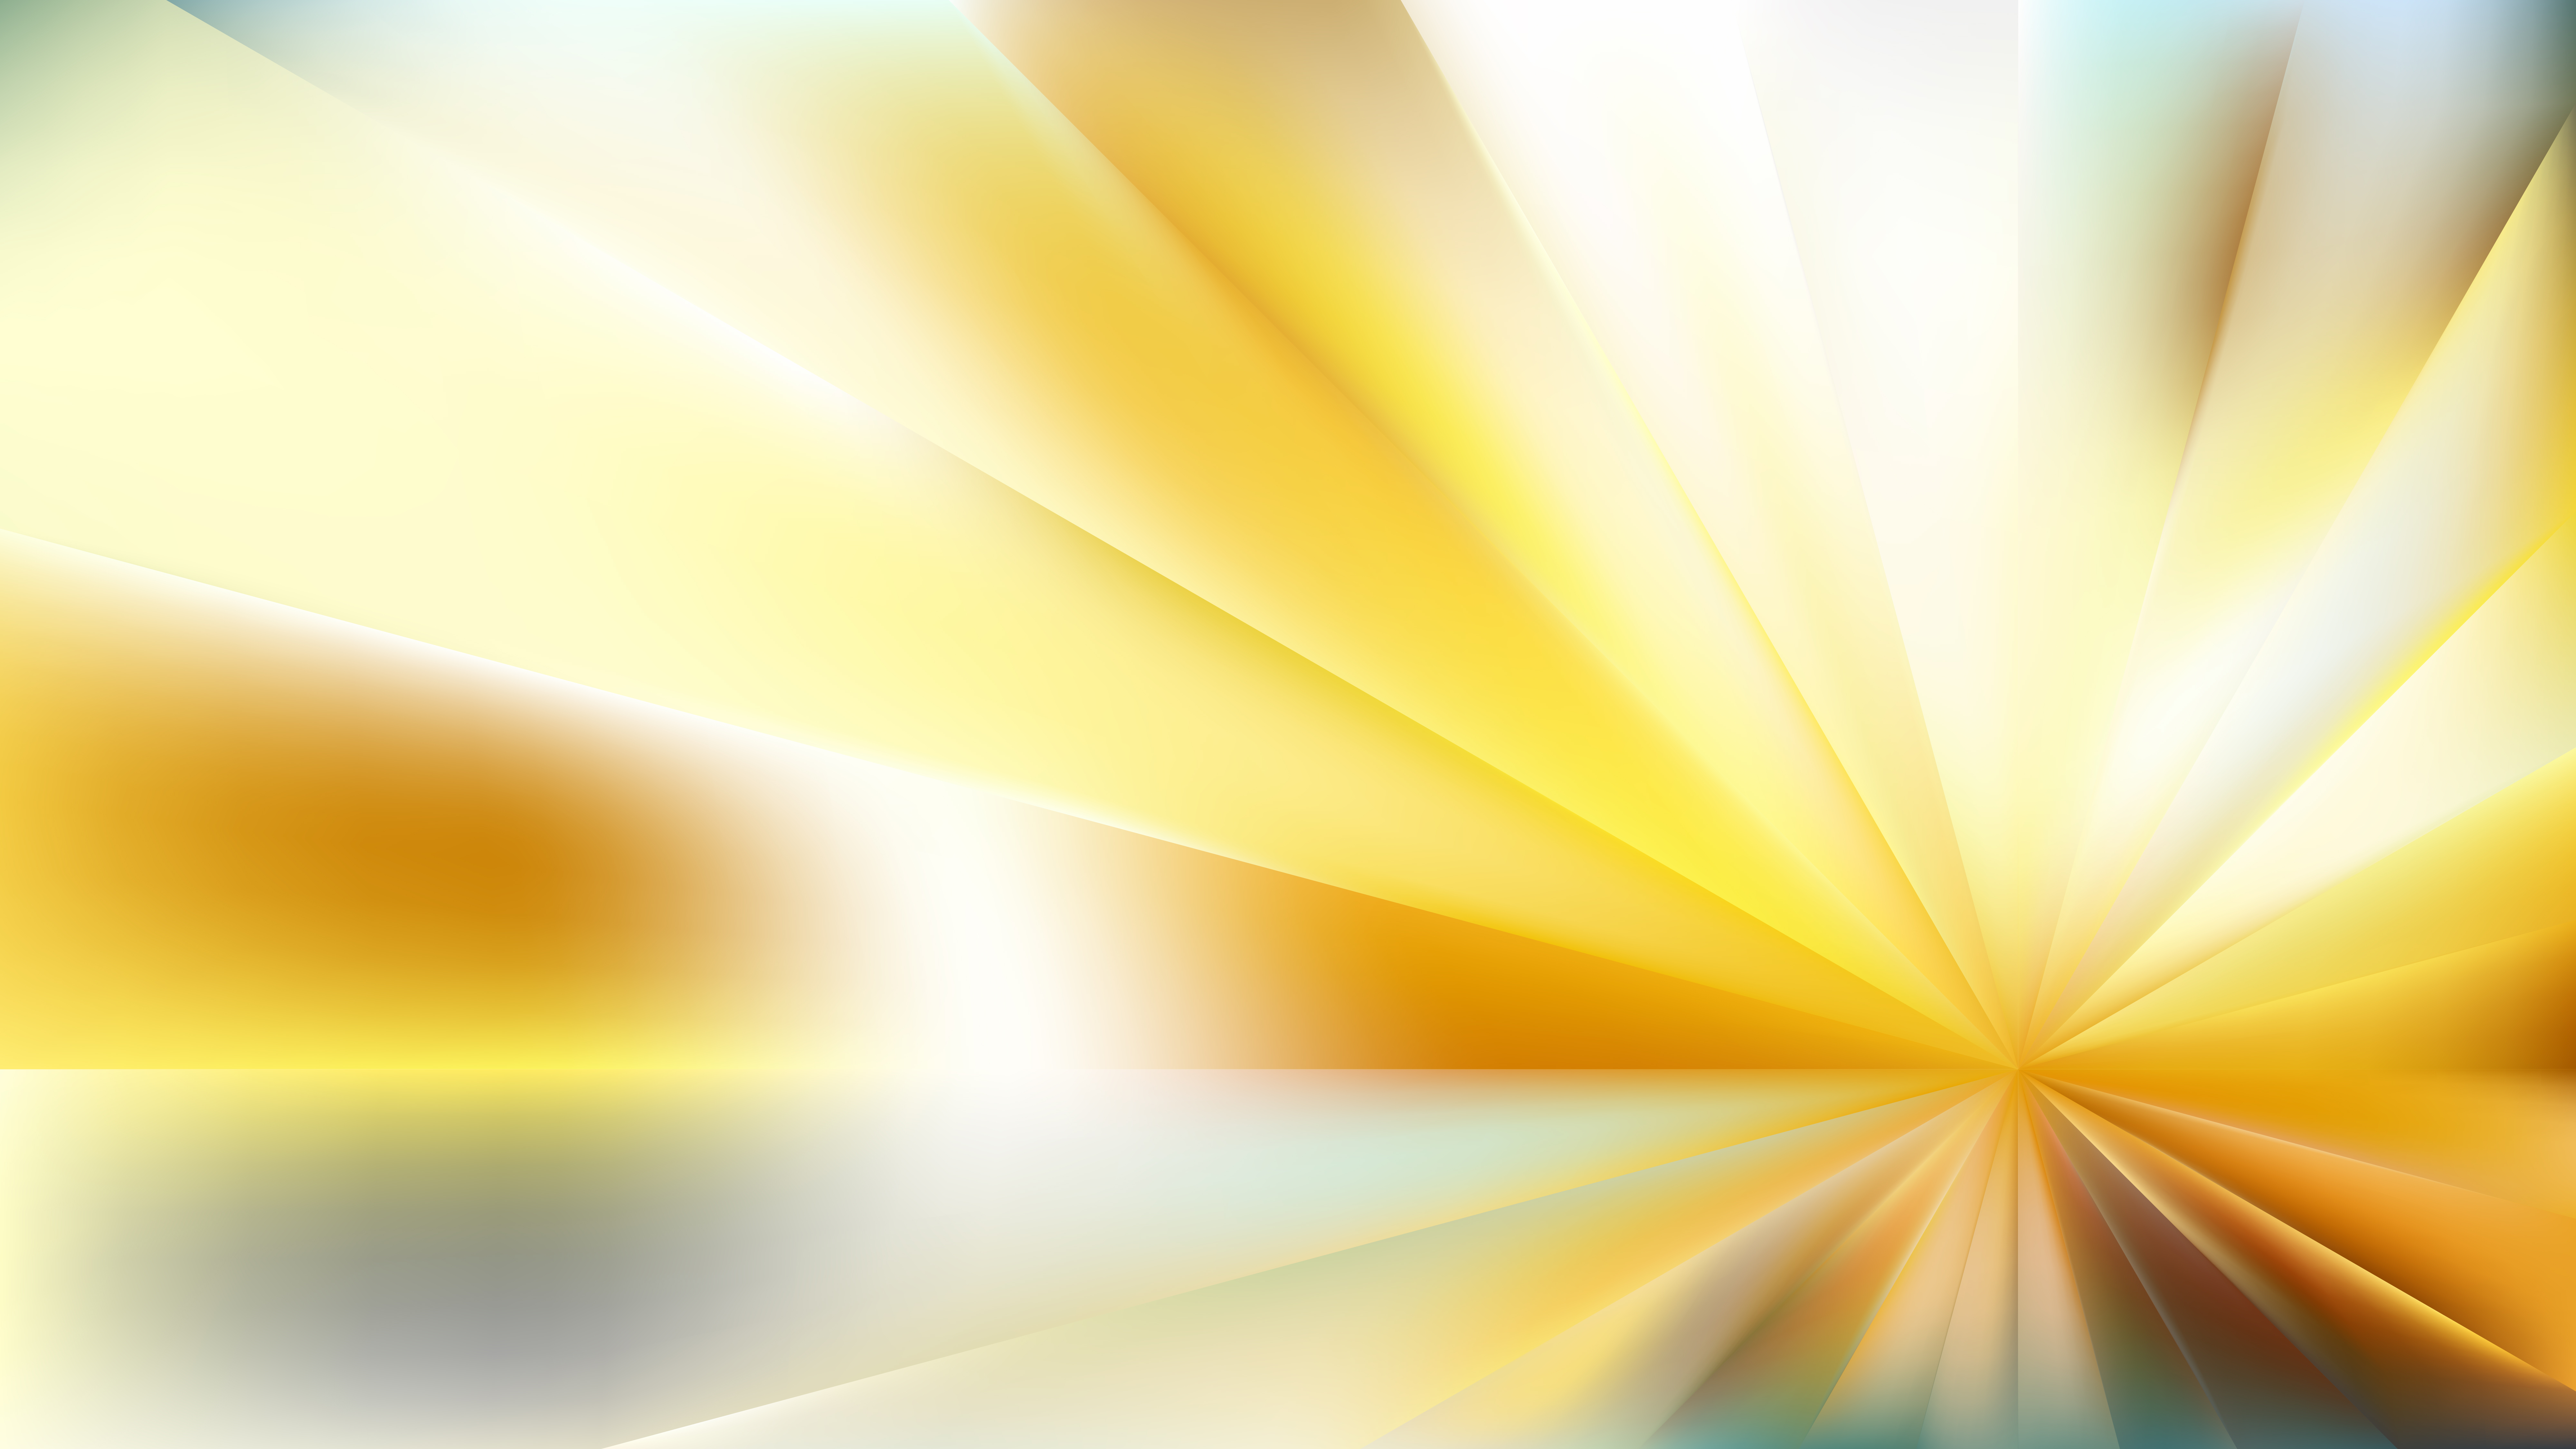 Free Light Yellow Abstract Background Vector Art